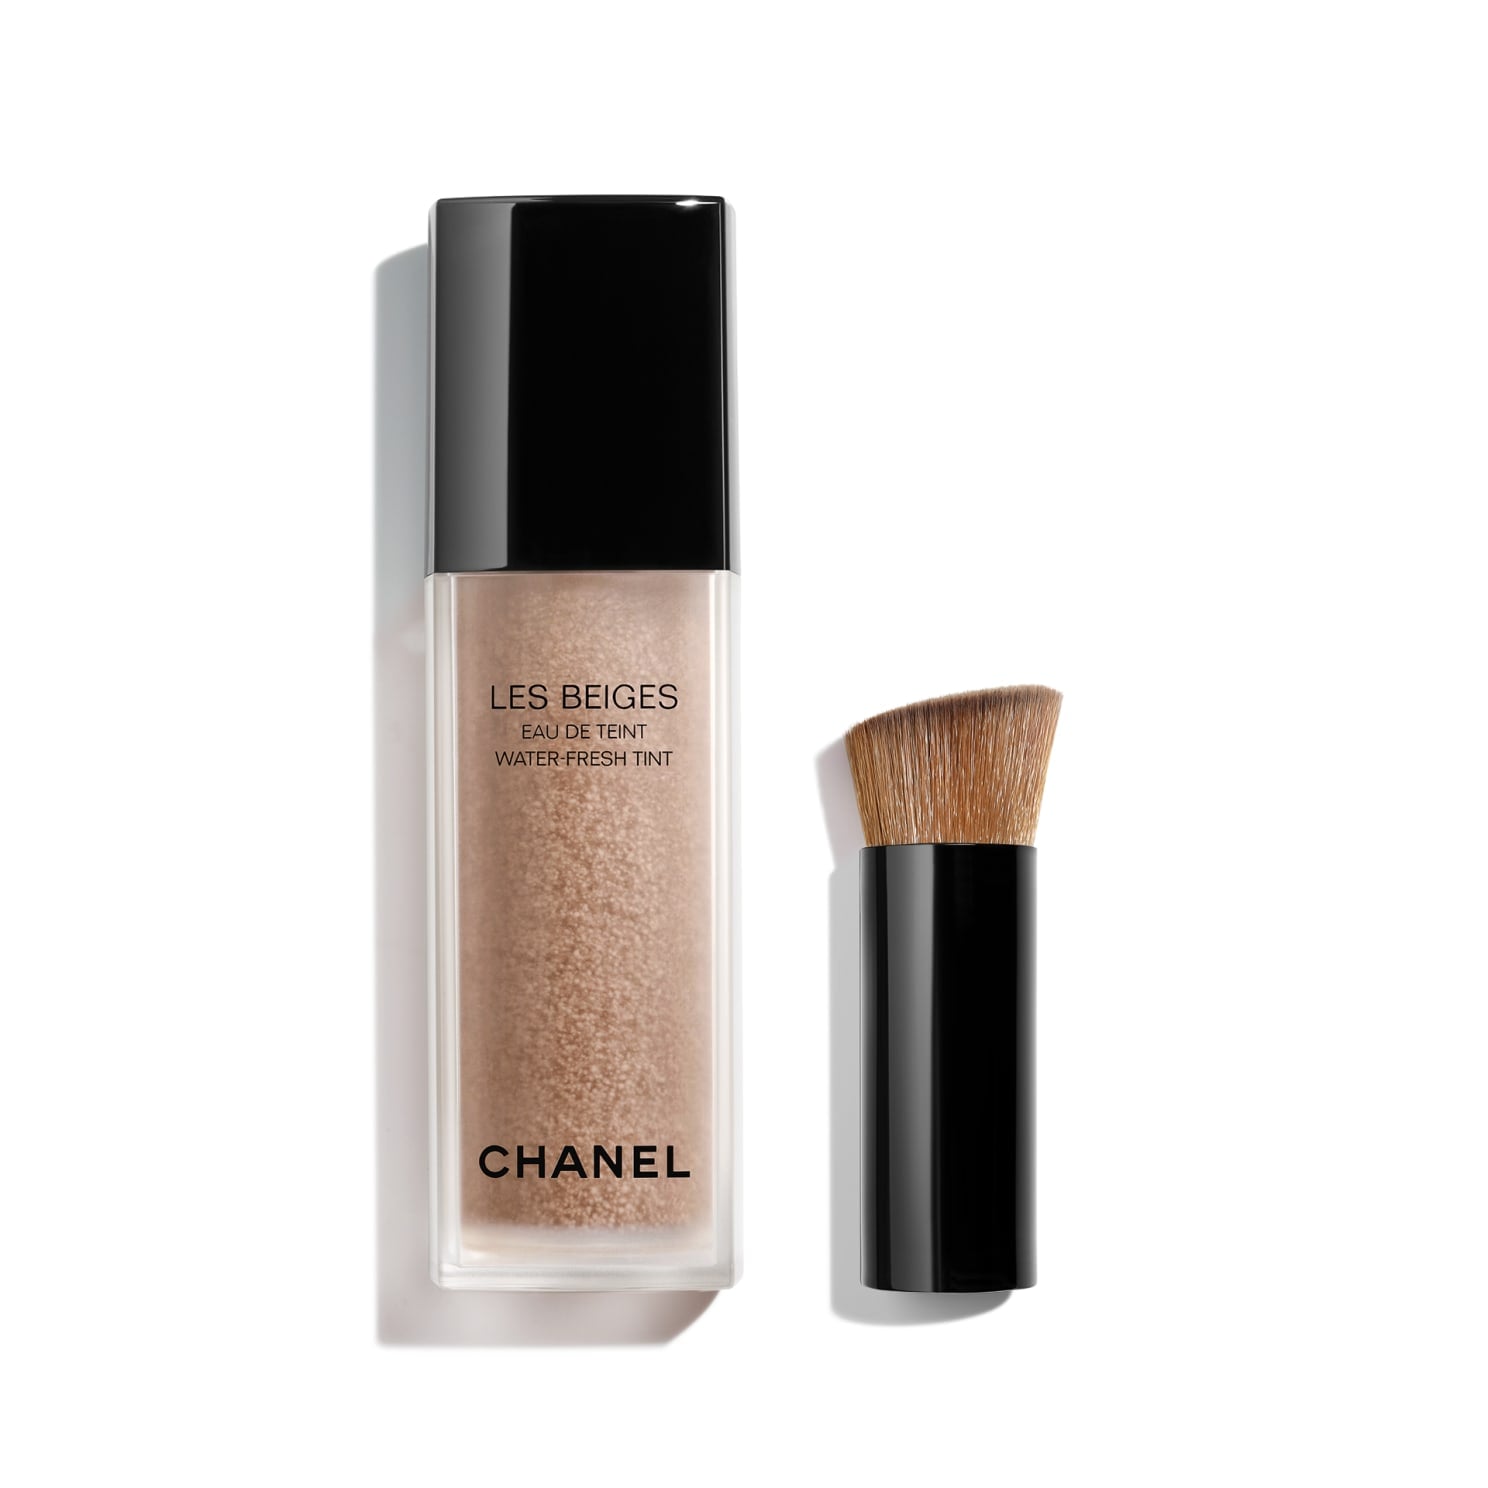 Chanel Les Beiges Water Fresh Tint Review, Gallery posted by Sandy D Ortiz